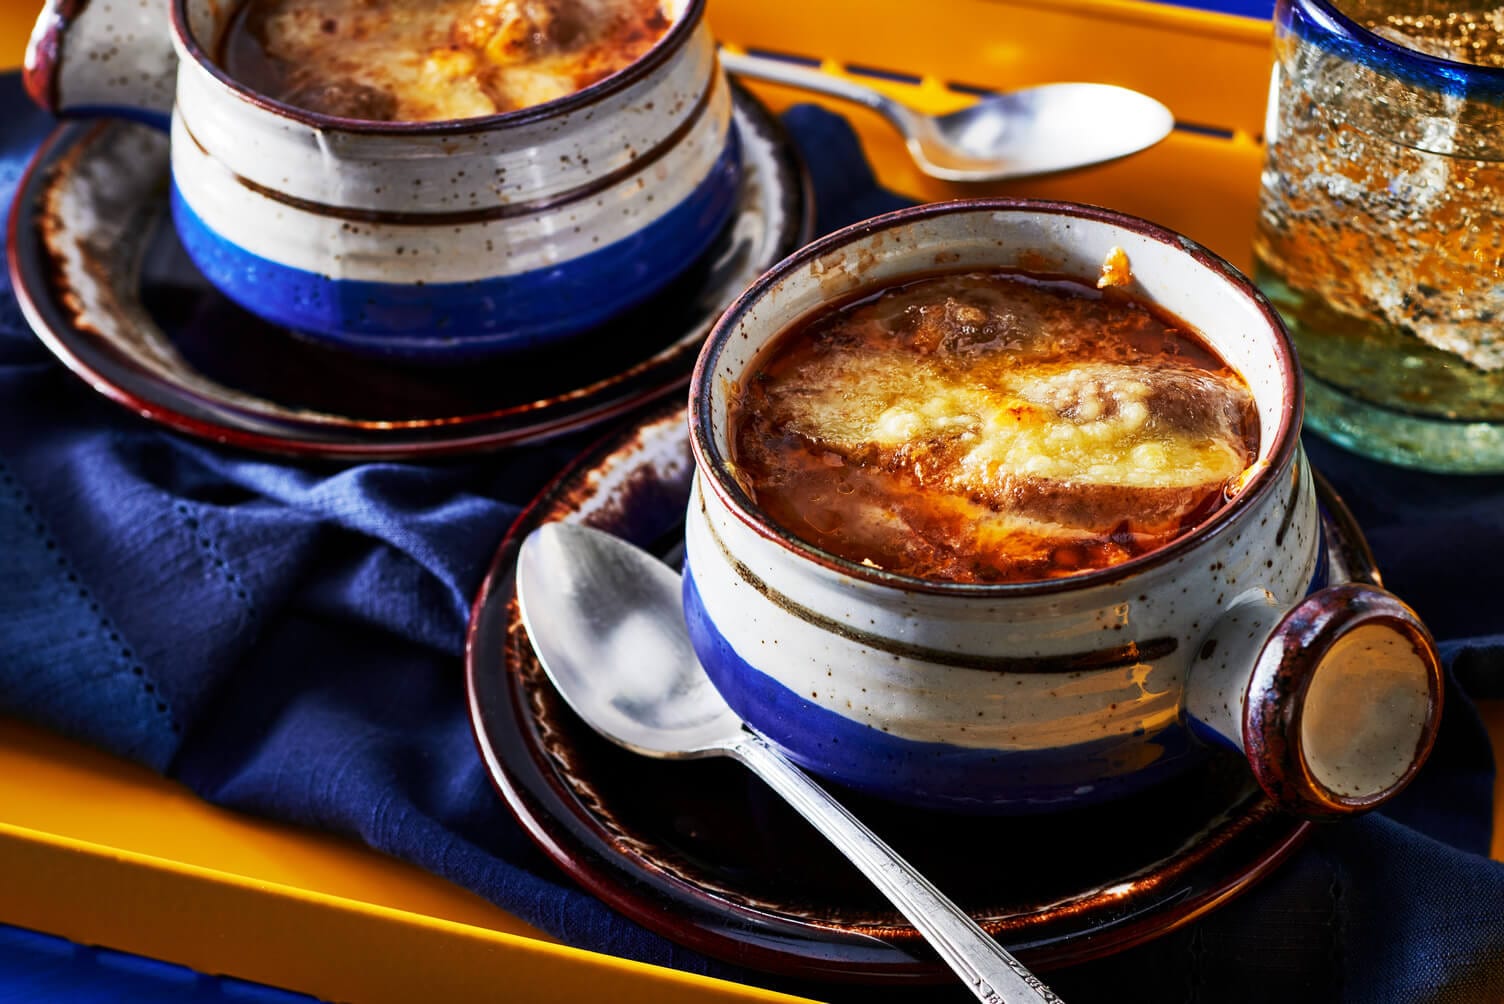 Delicious little bowls of French onion soup with potatoes.